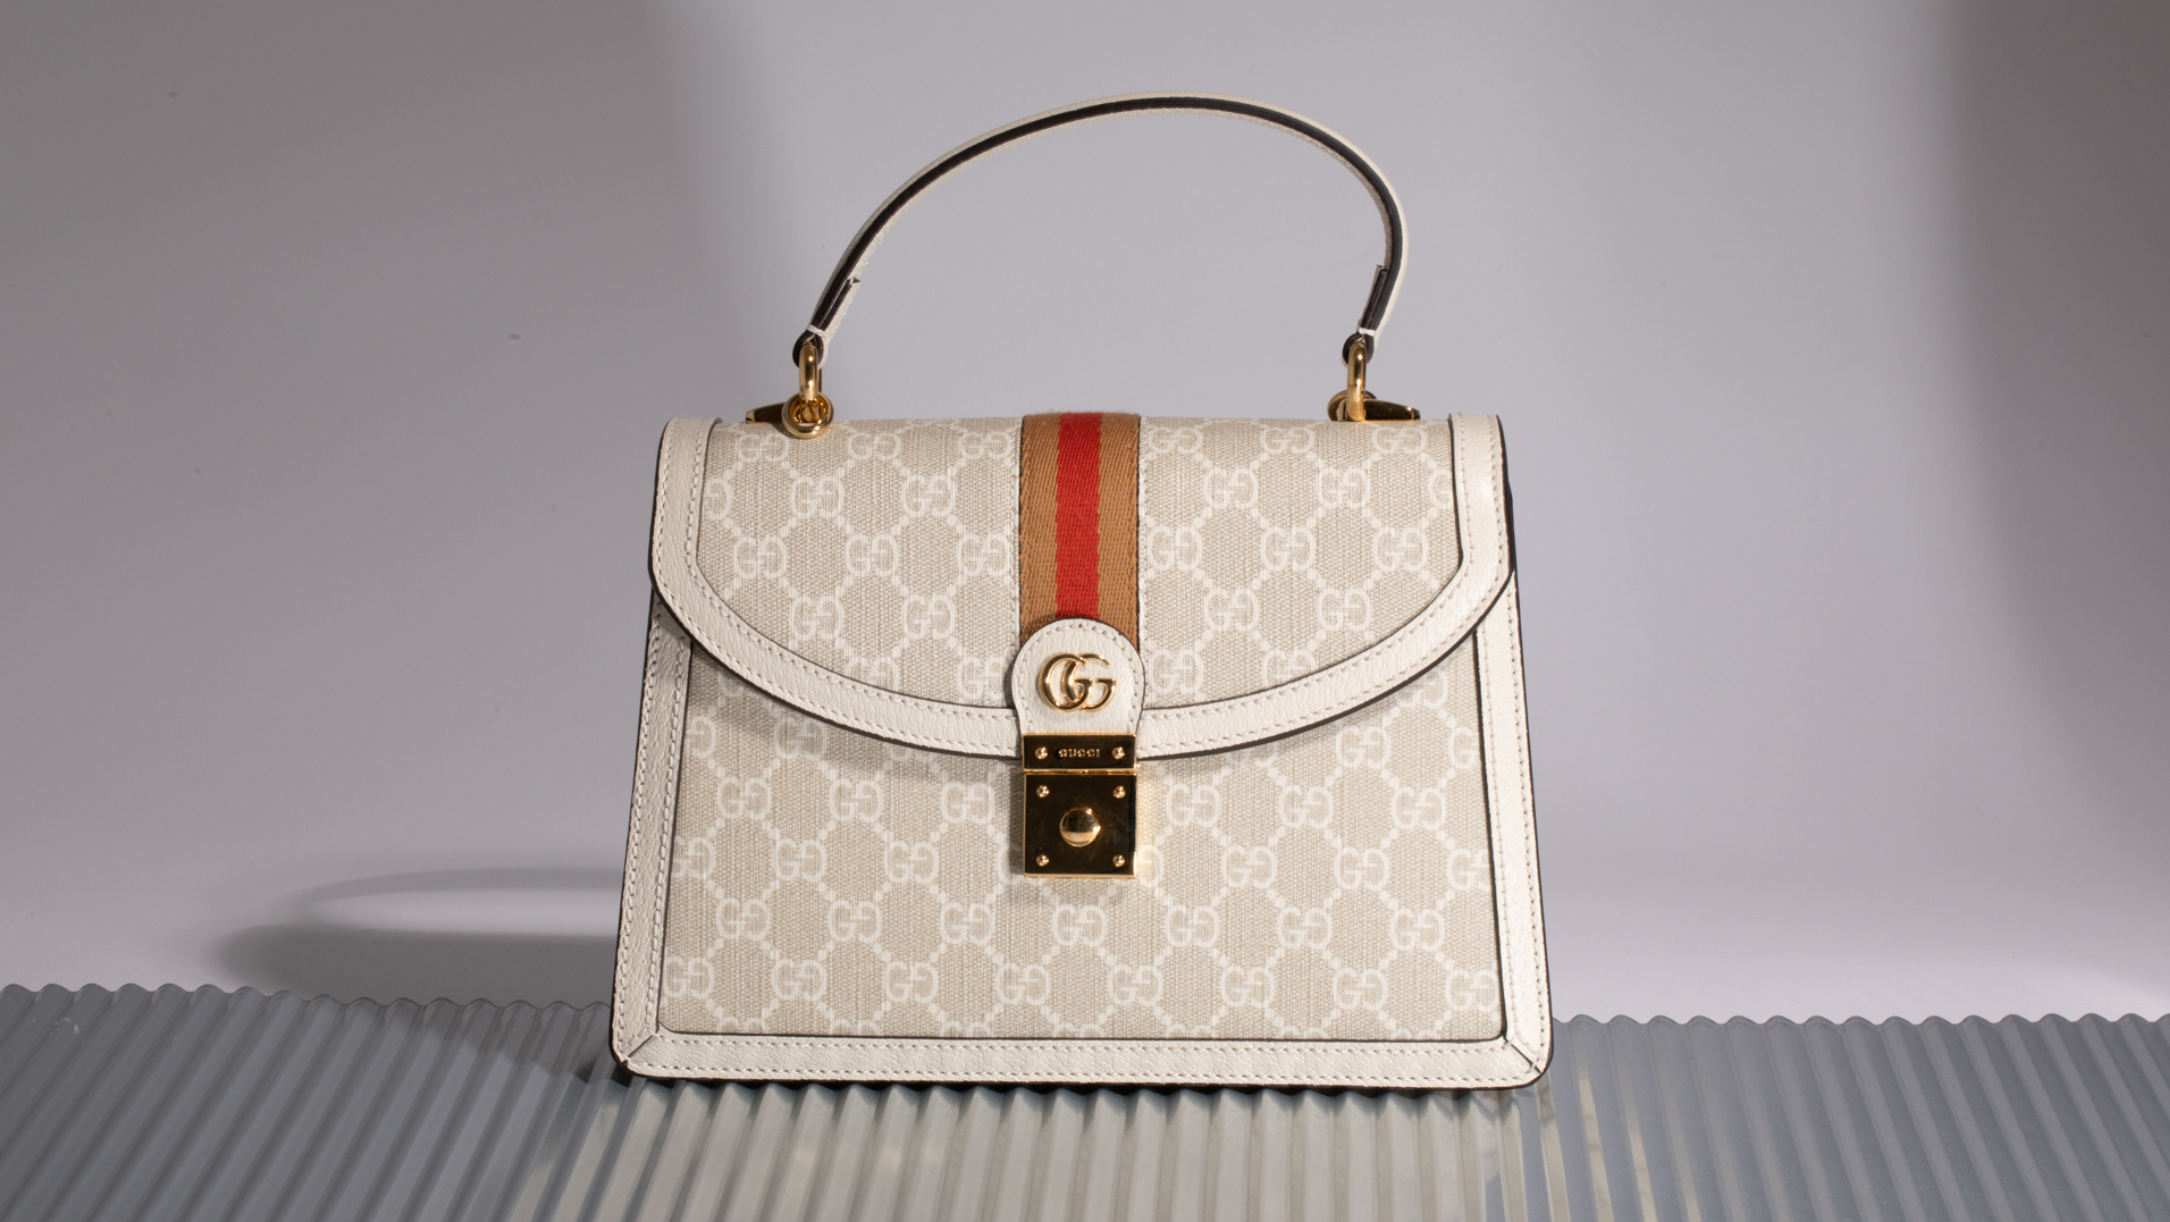 Why are some women crazy about Gucci bags? - Quora